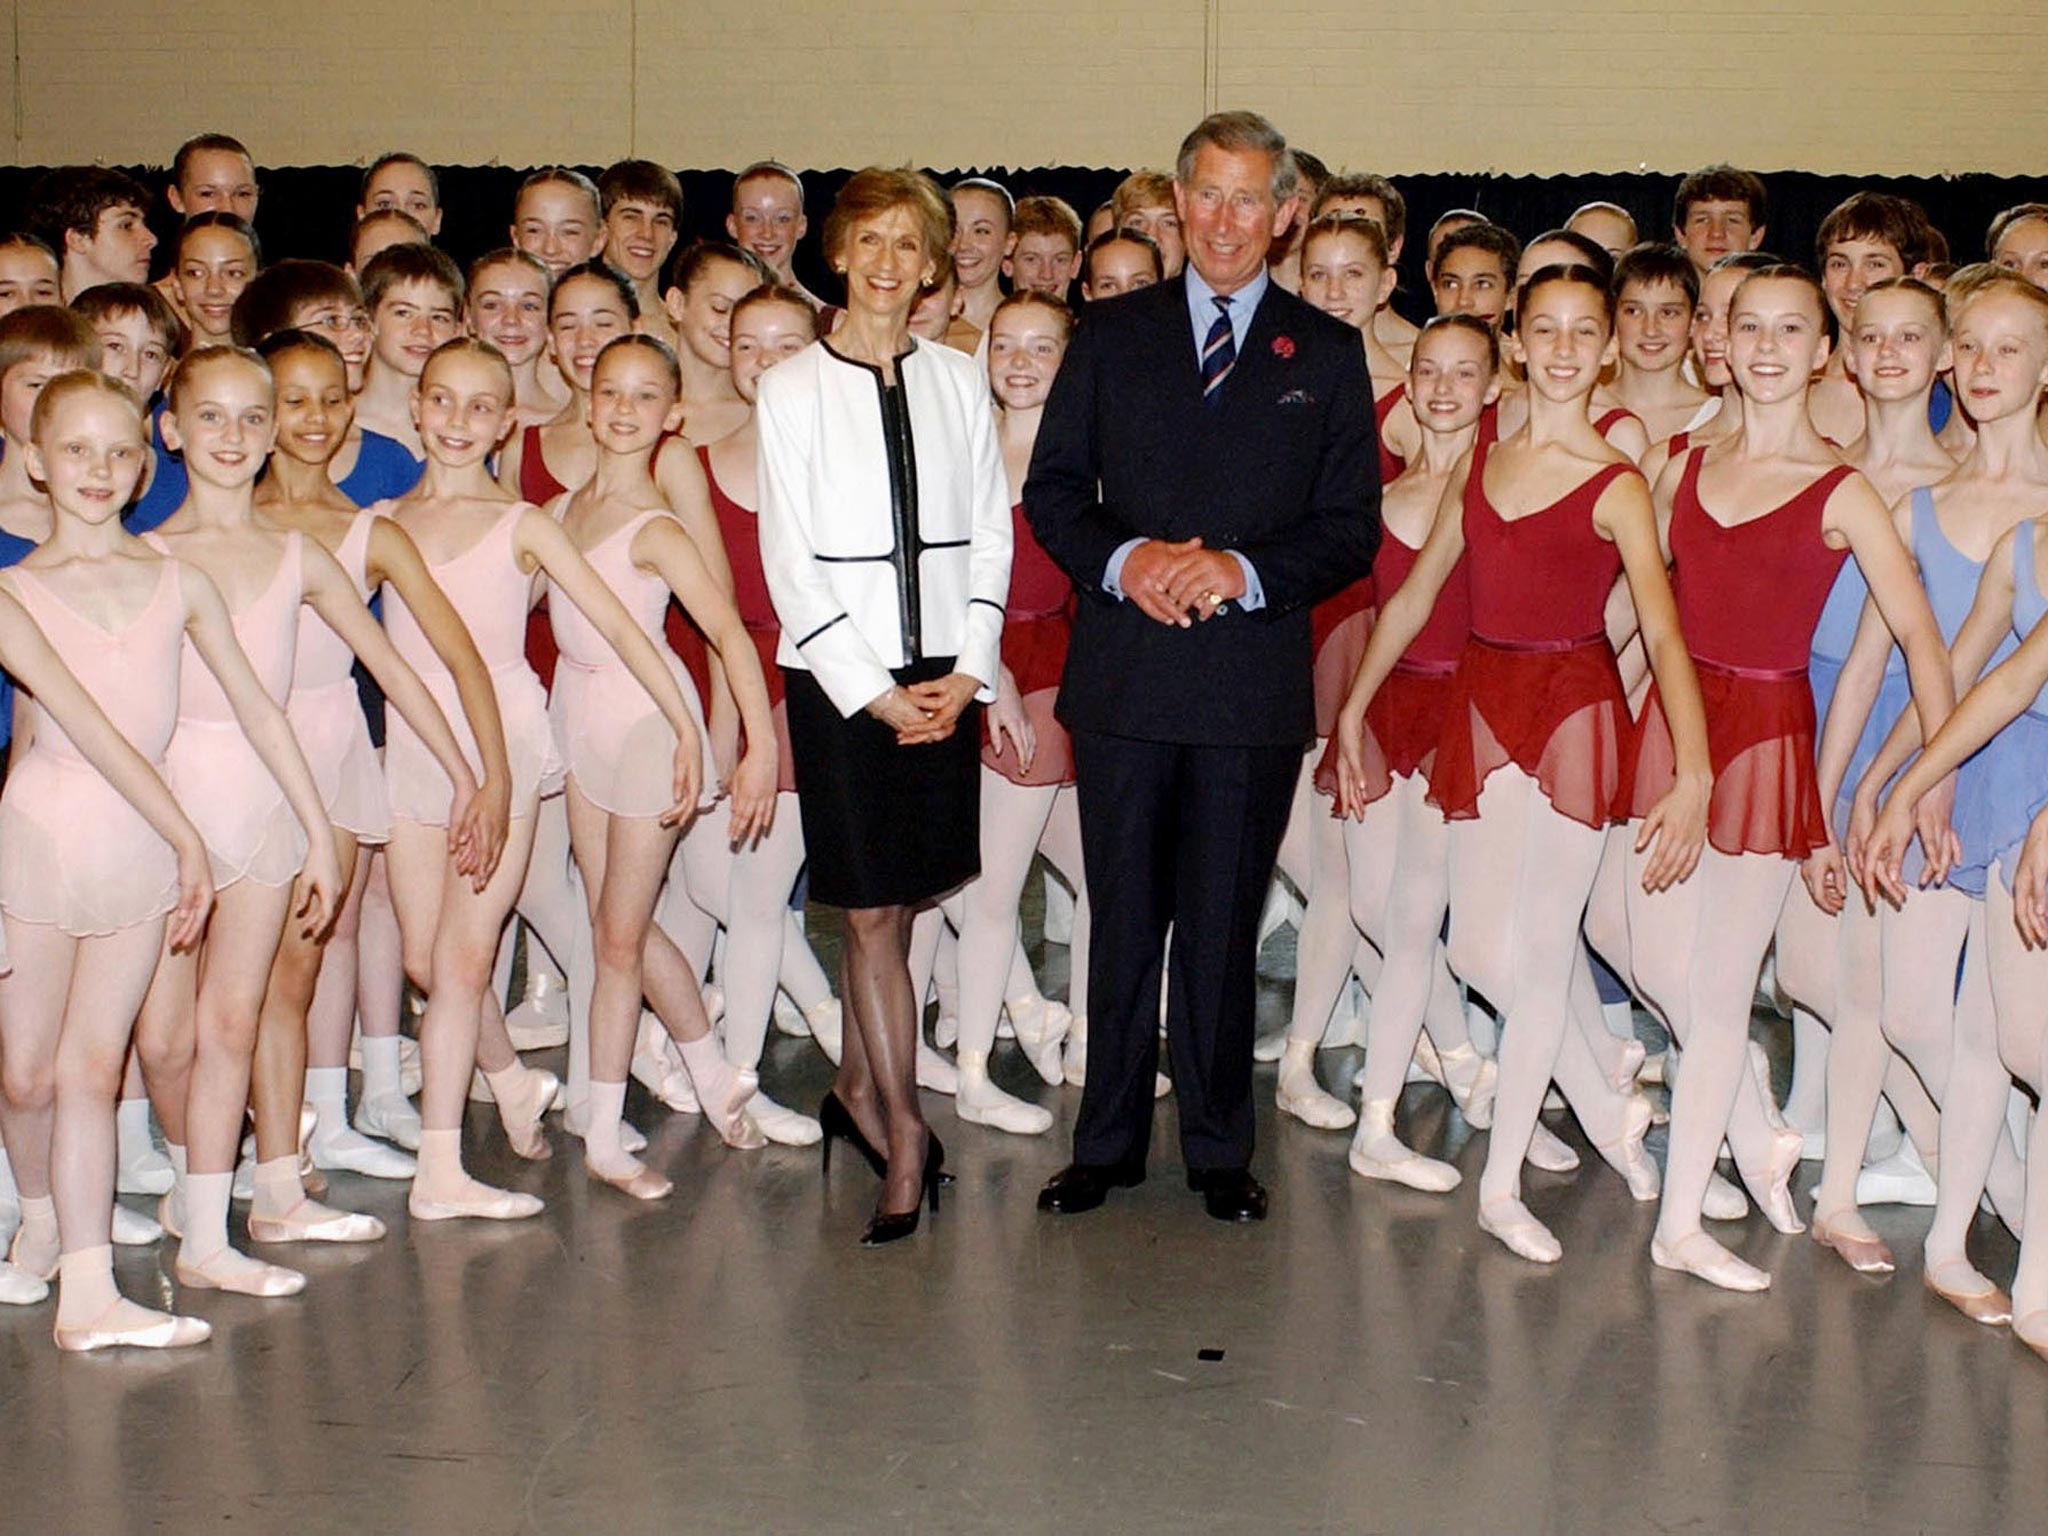 Gailene Stock with Prince Charles and pupils of The Royal Ballet's White Lodge School in 2004